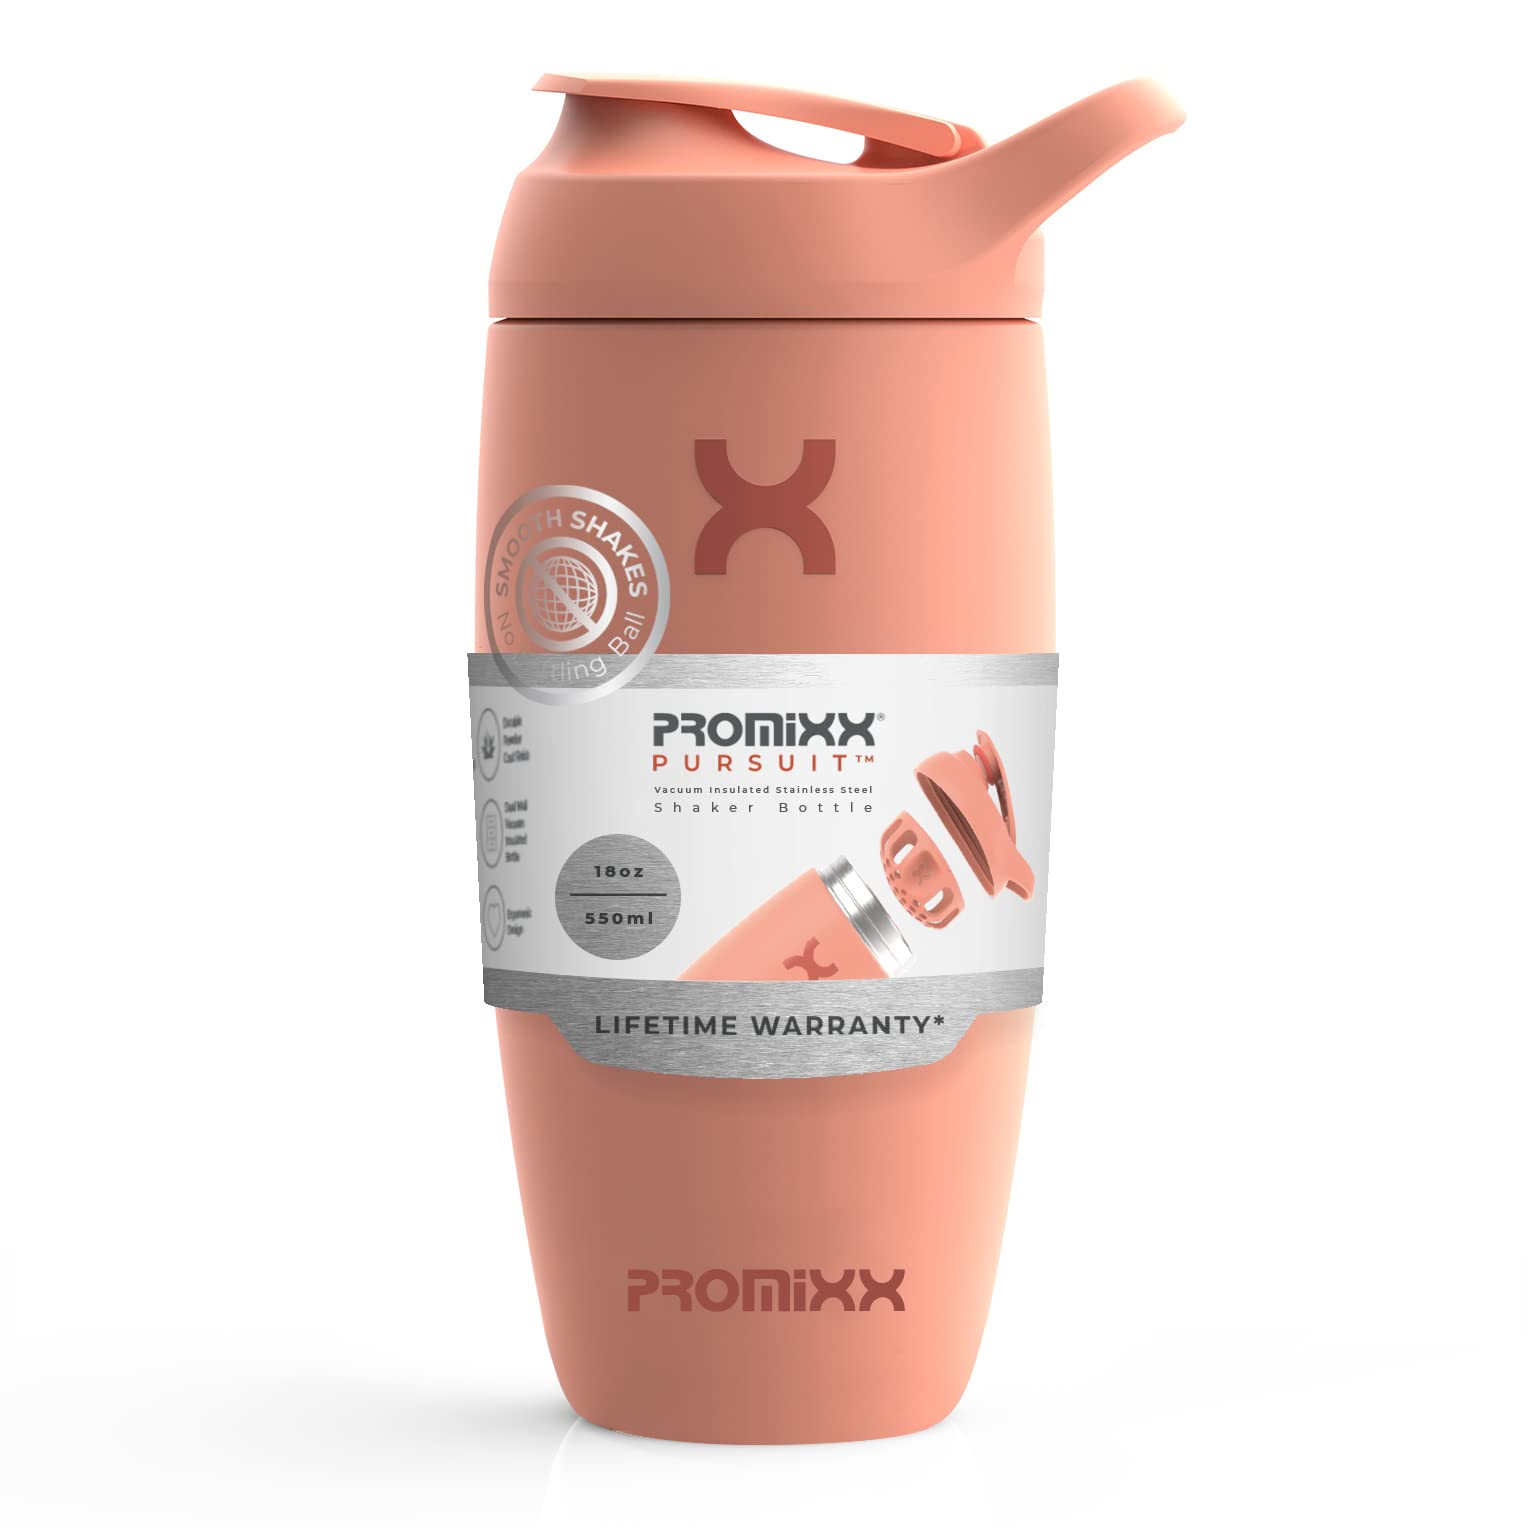 Promixx Pursuit Shaker Bottle Insulated Stainless Steel Water Bottle and Blender Cup, 18oz, Coral